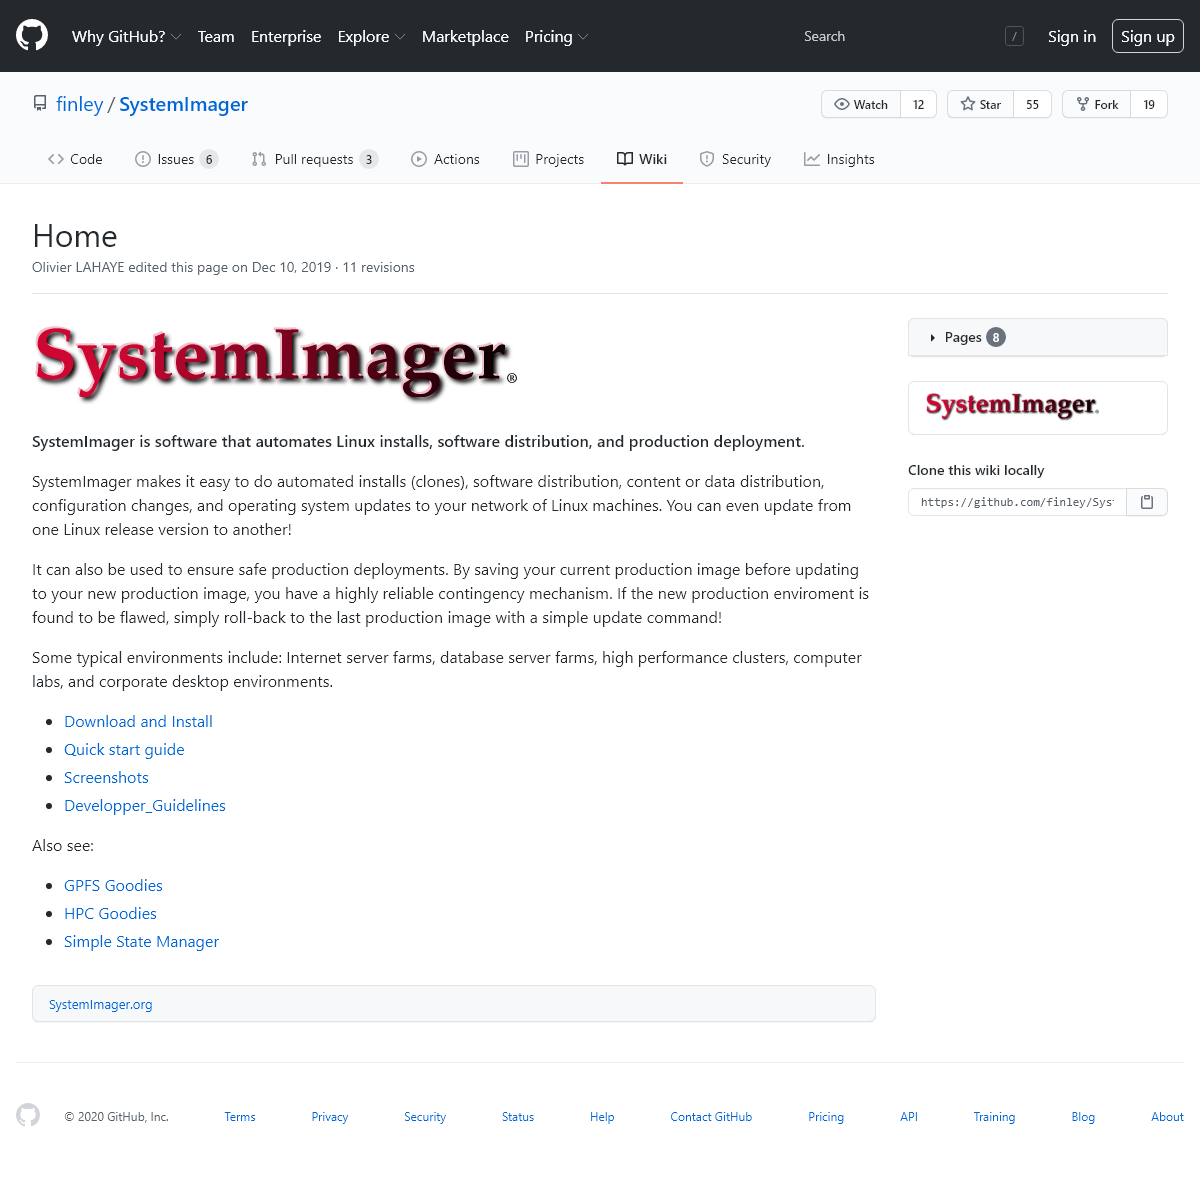 A complete backup of systemimager.org